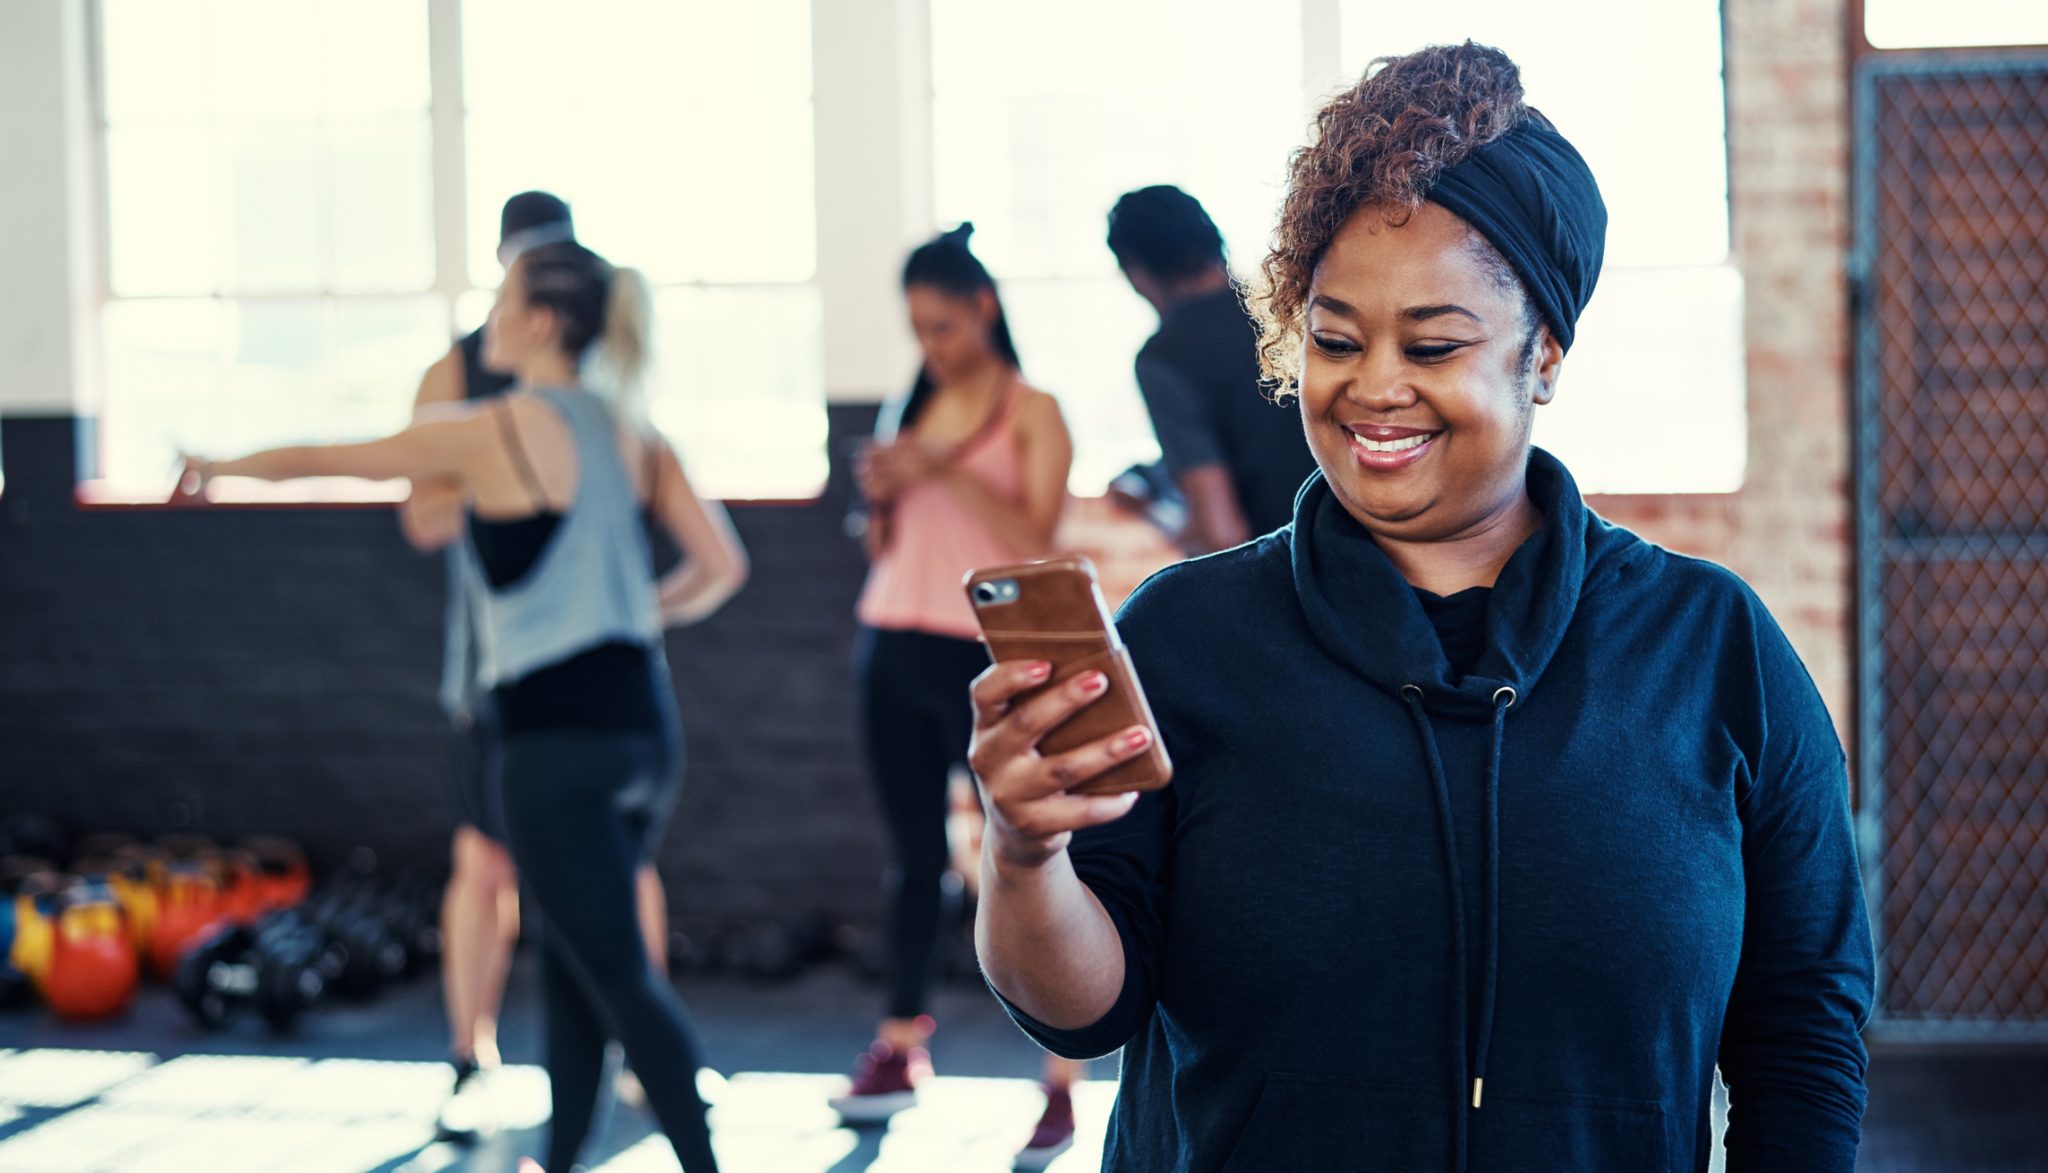 A woman looking at her phone and smiling before an exercise class